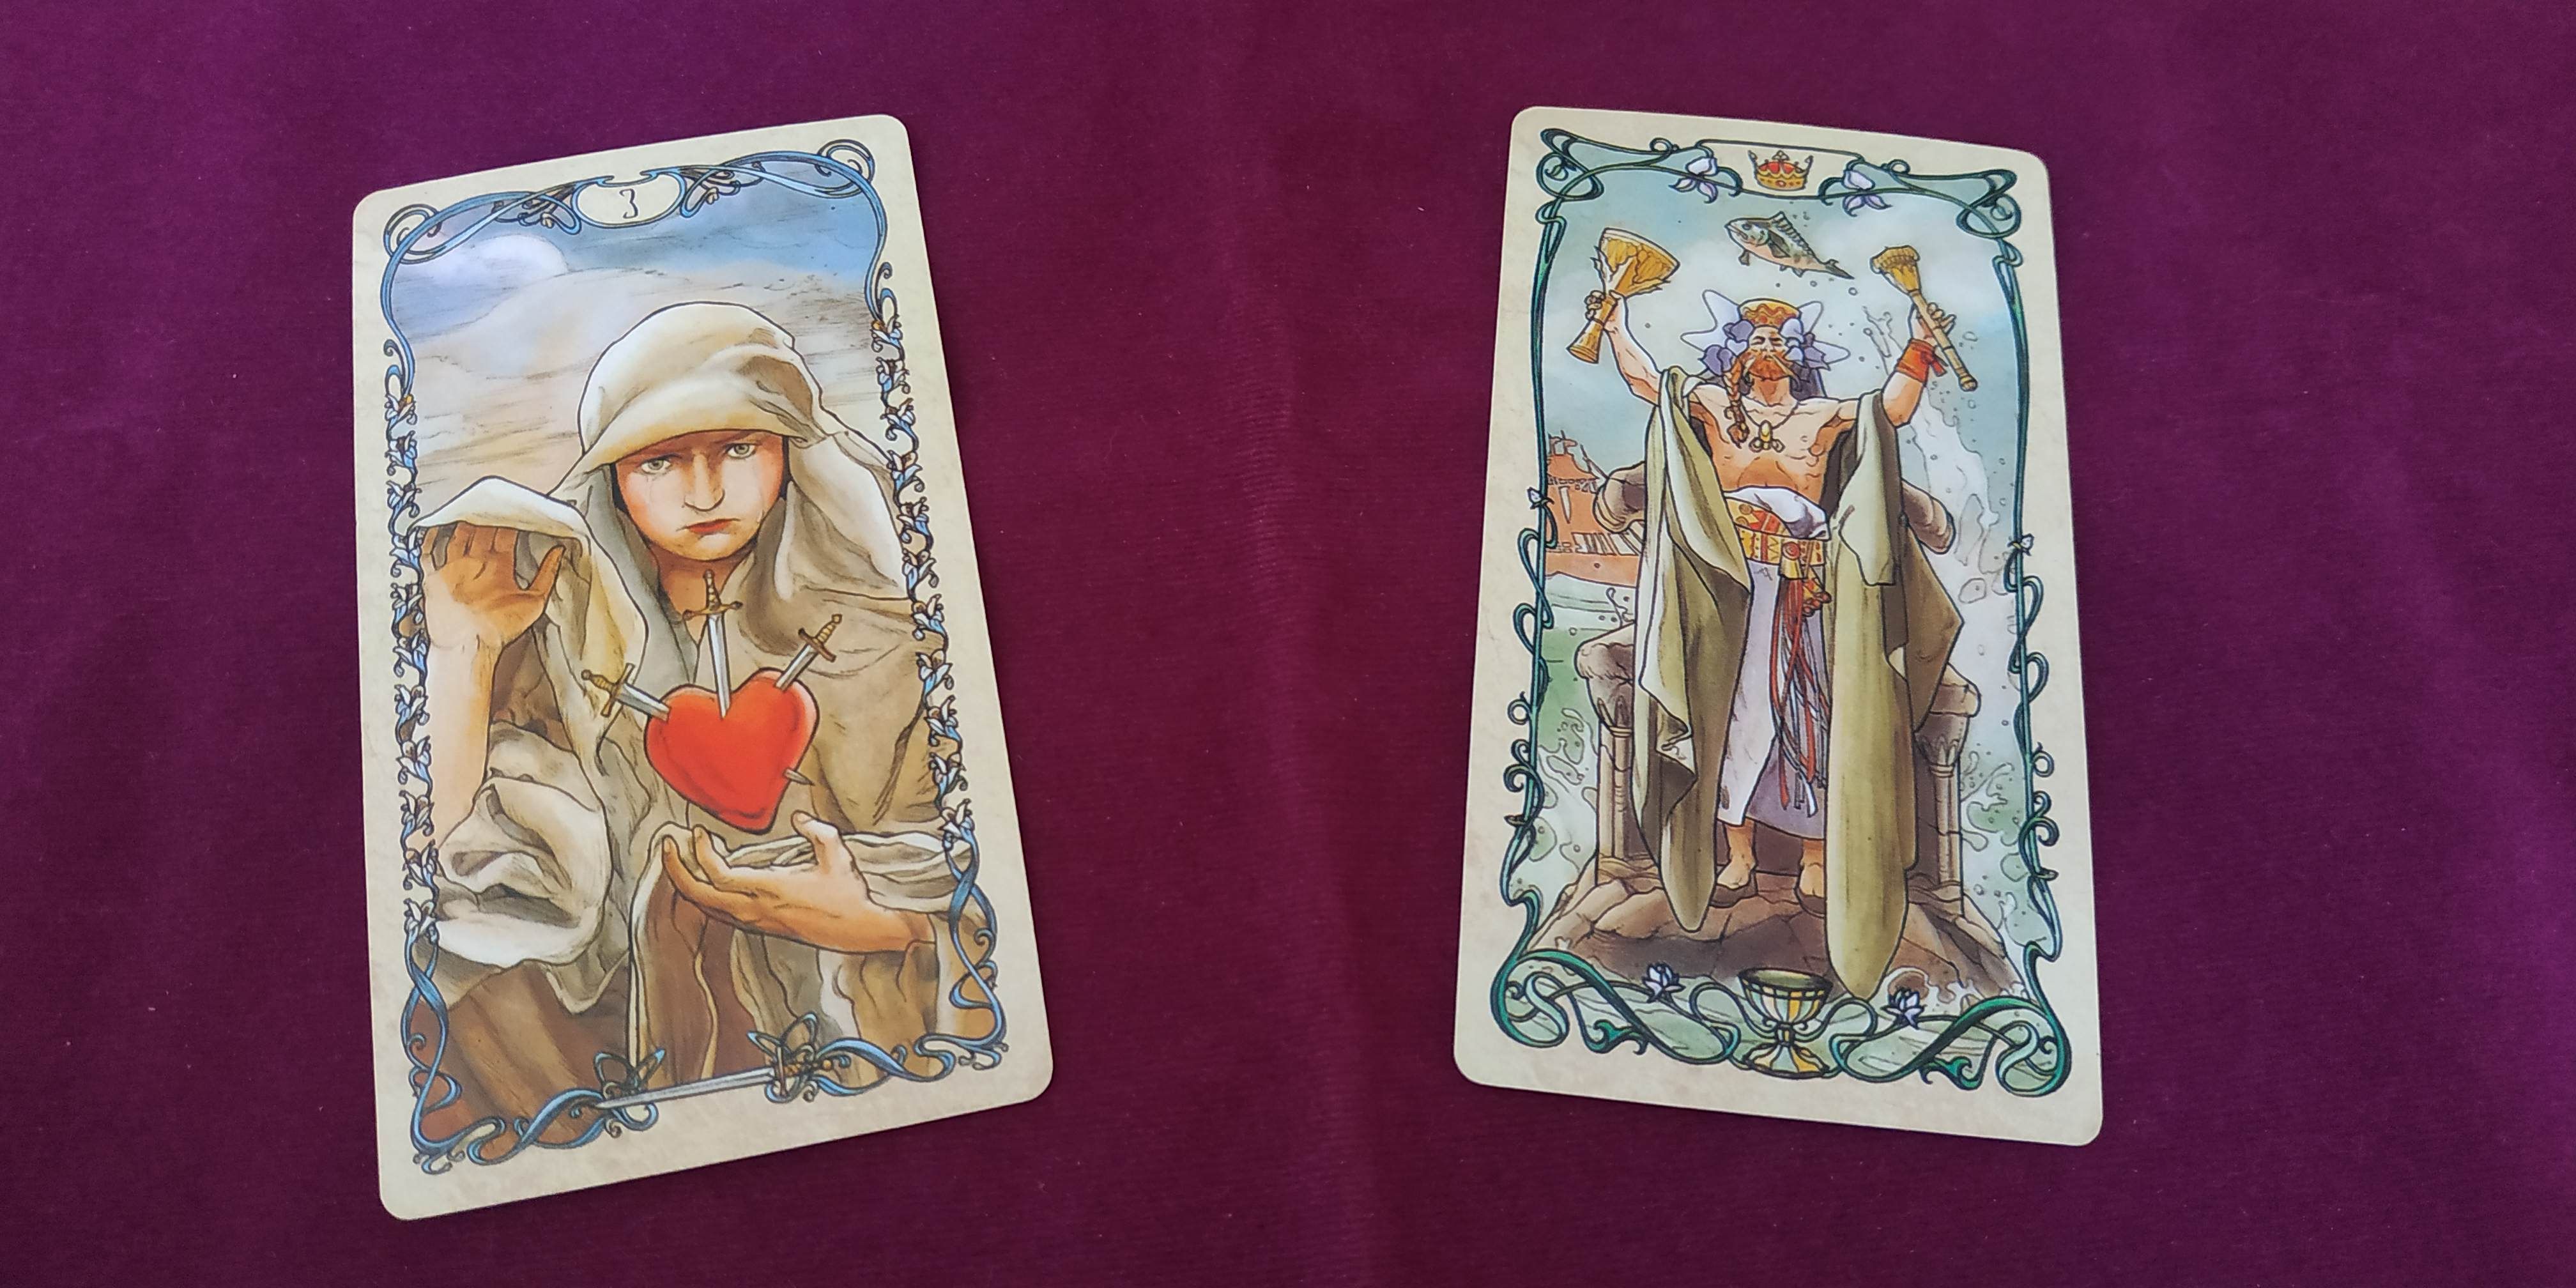 3 of Swords and King of Cups